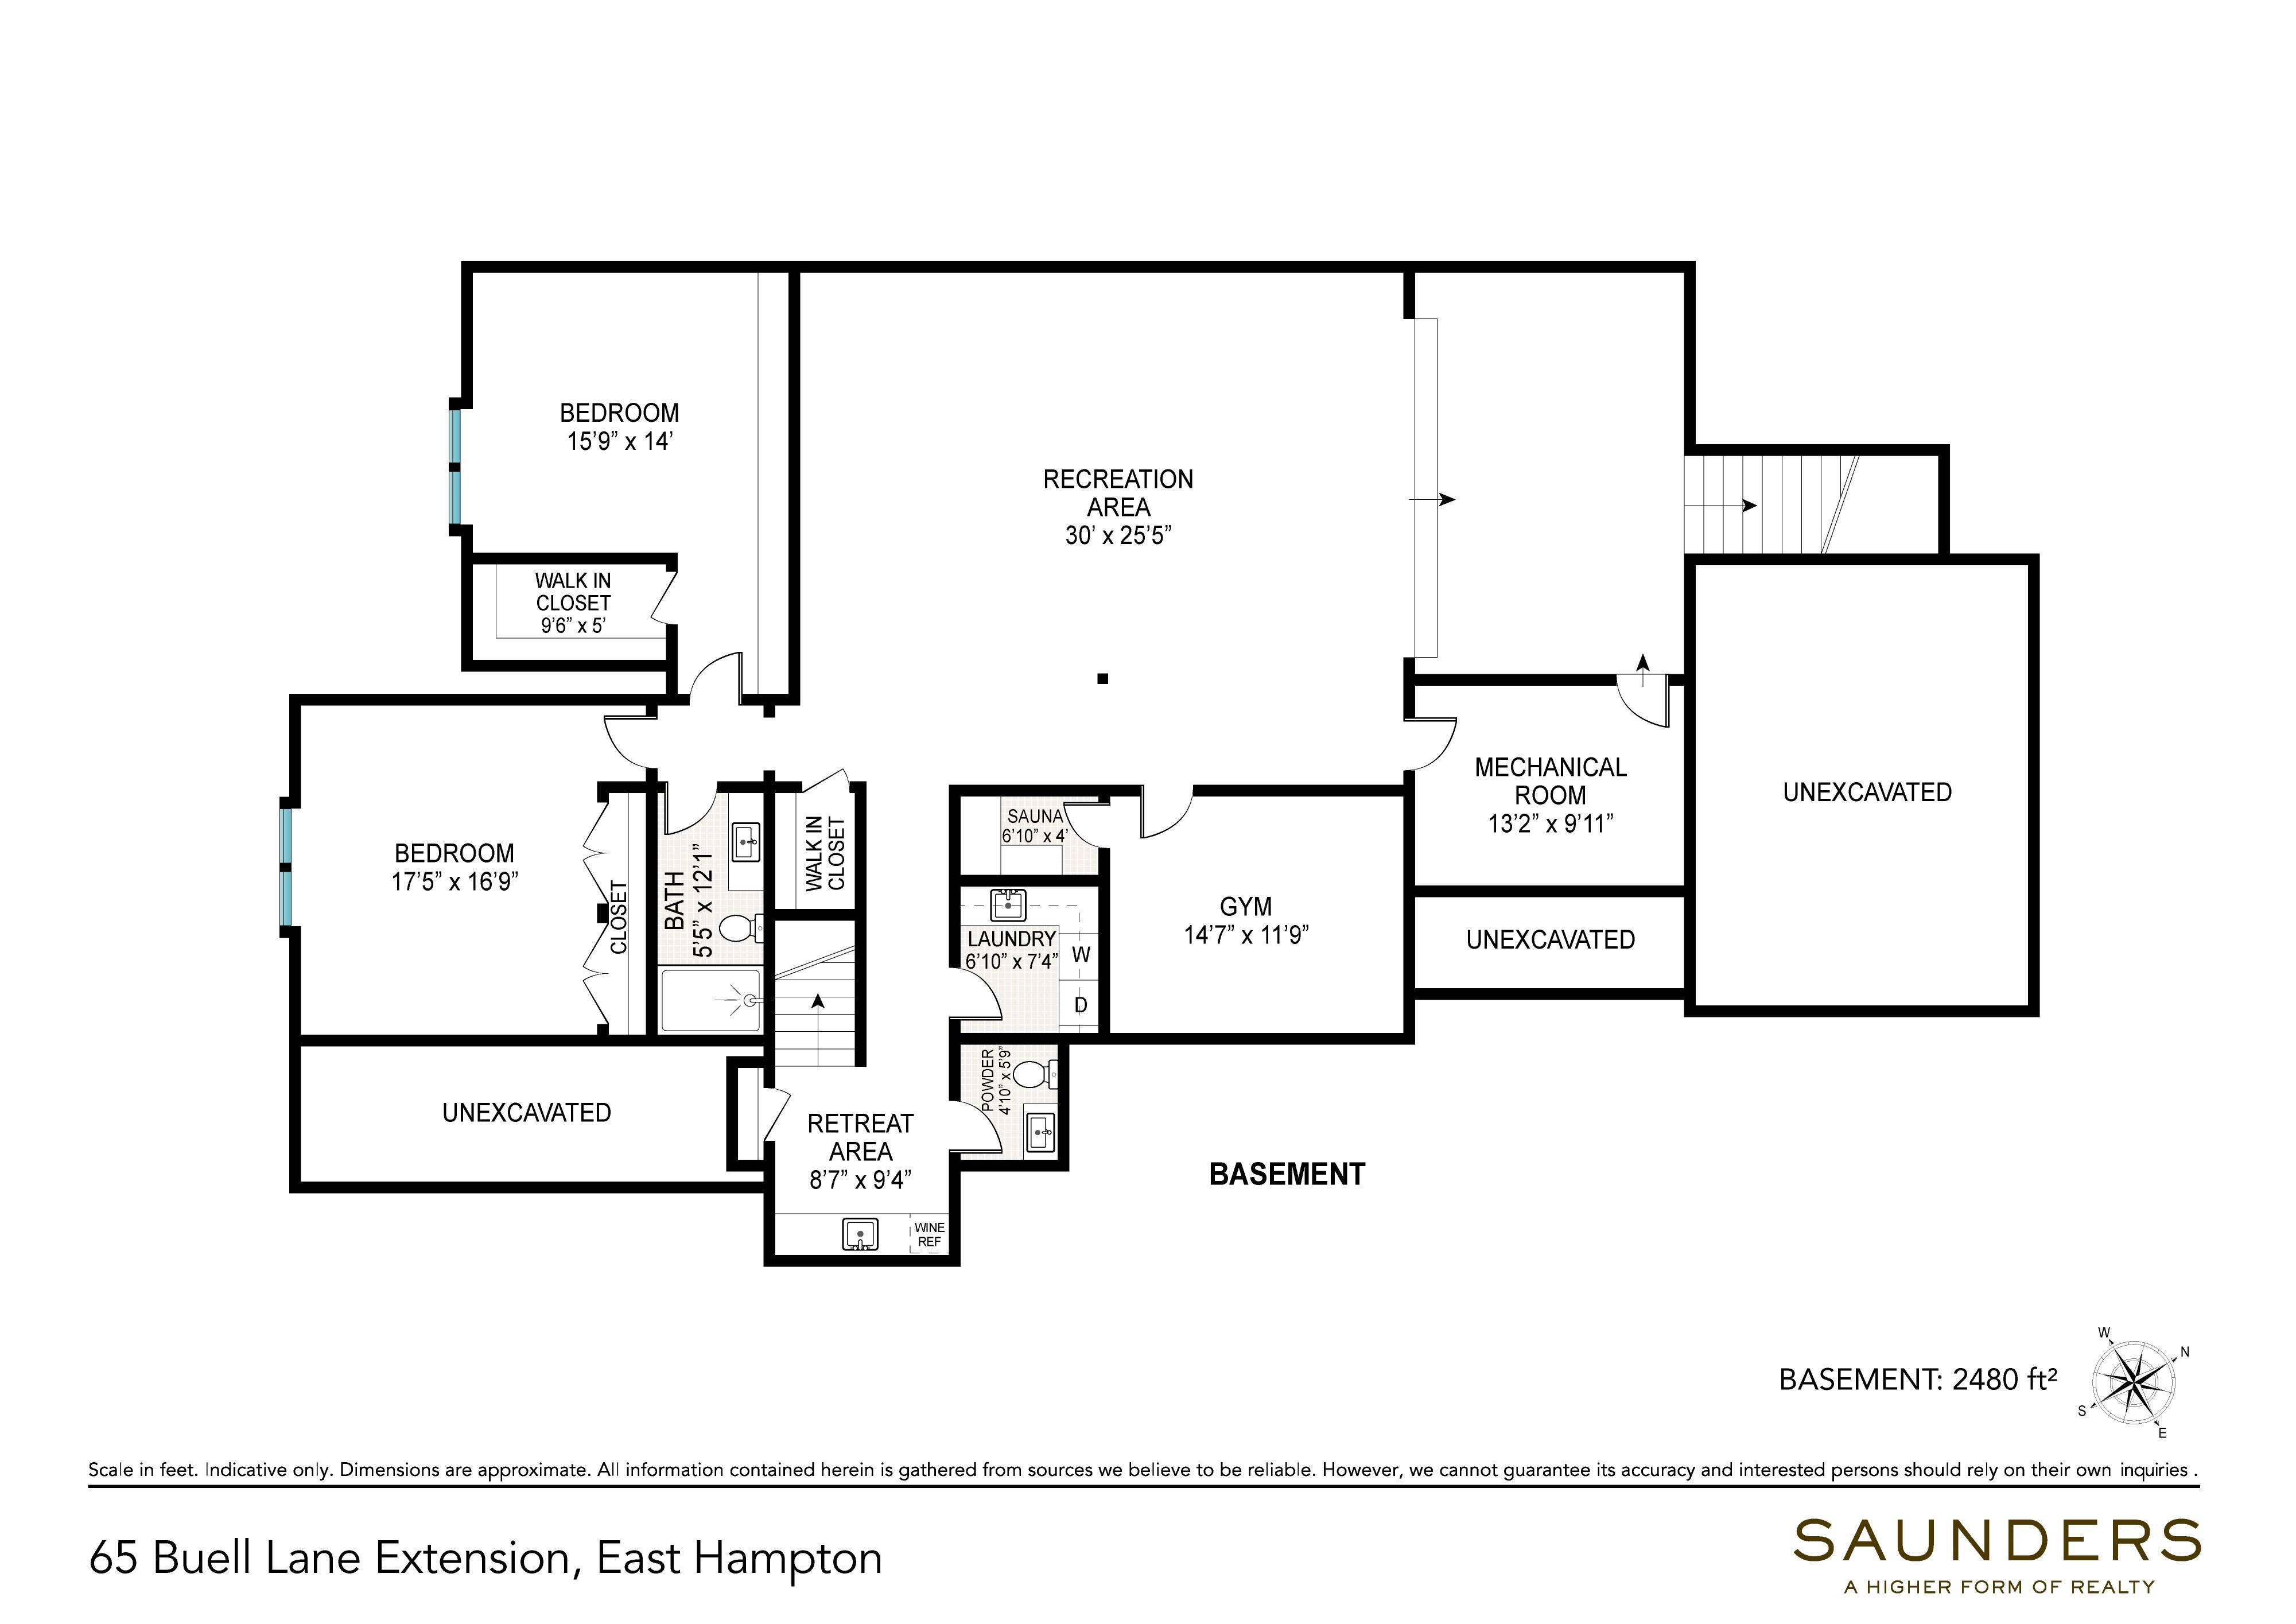 Single Family Homes for Sale at New Construction, Ready Now 65 Buell Lane Extension, East Hampton, NY 11937